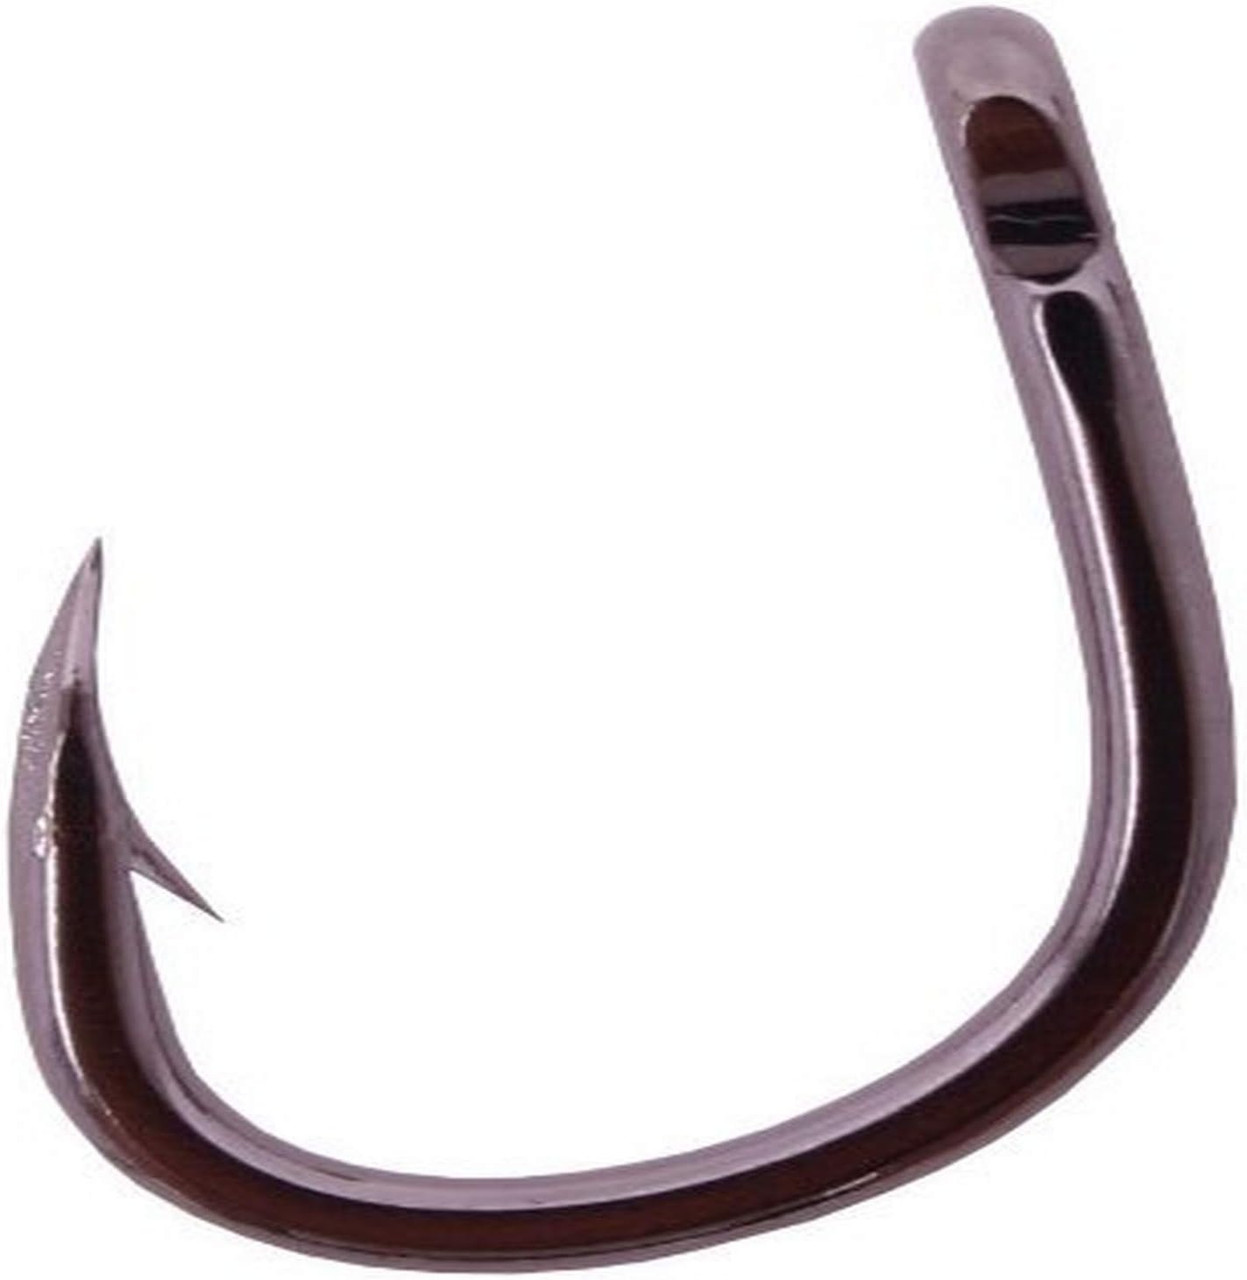 Owner American 5105-171 Gorilla Live Bait Hook with Cutting Point Size 7/0